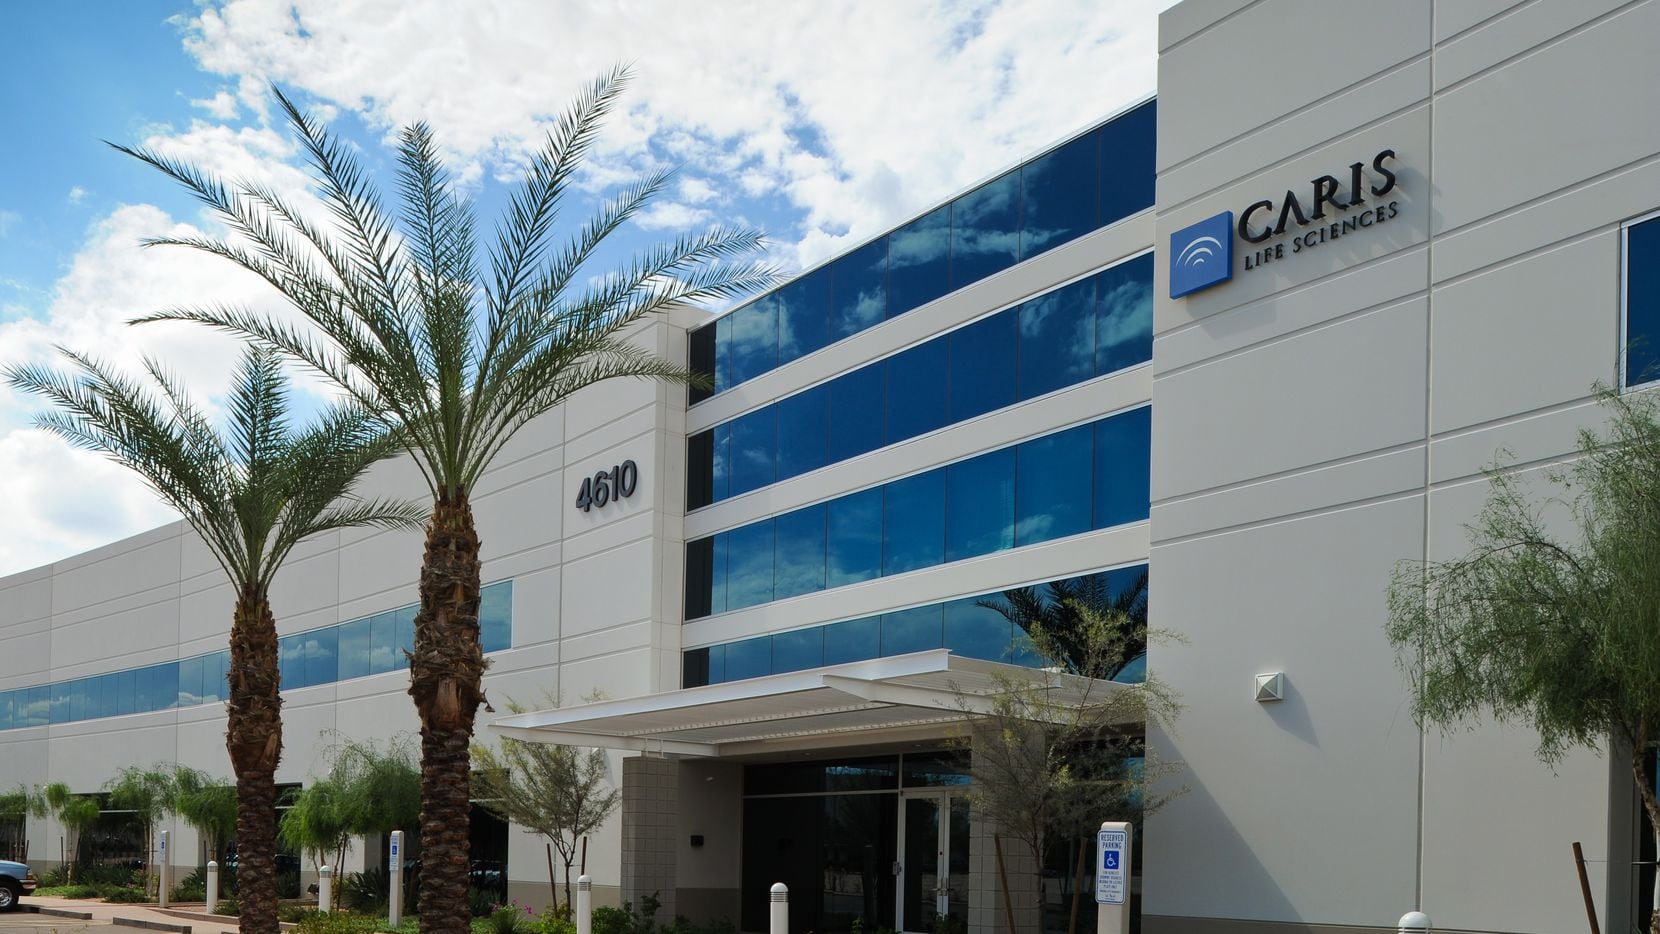 Caris Life Sciences is headquartered in Irving. The health care company is being sued by four employees for its vaccine policy announced on Sept. 17 that said all employees must be vaccinated by Dec. 1 or face termination, according to the lawsuit.